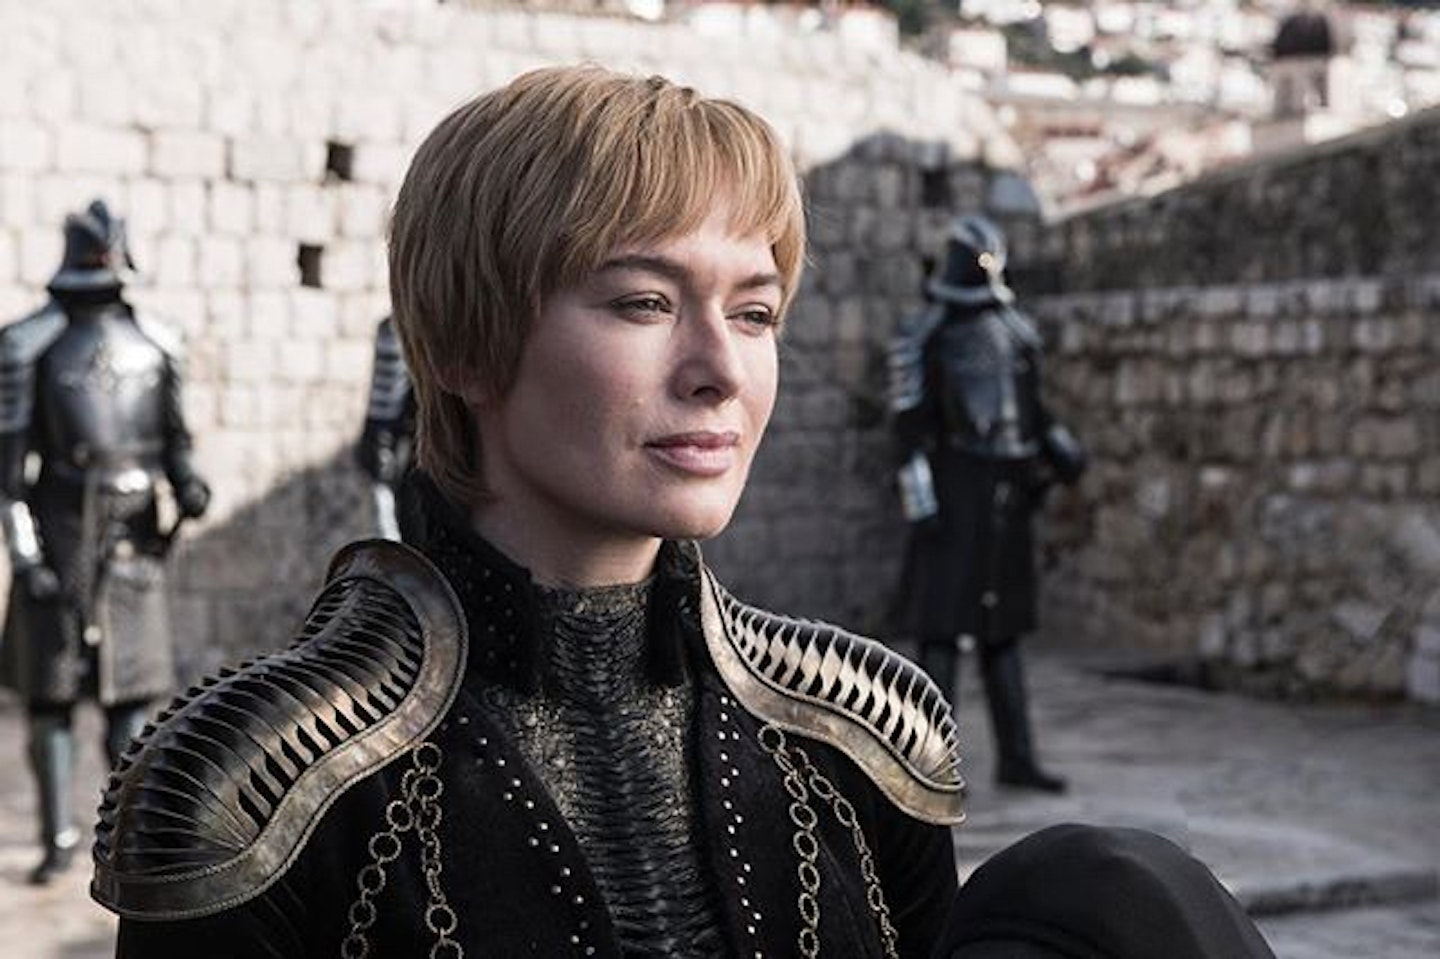 New Game Of Thrones Season 8 images